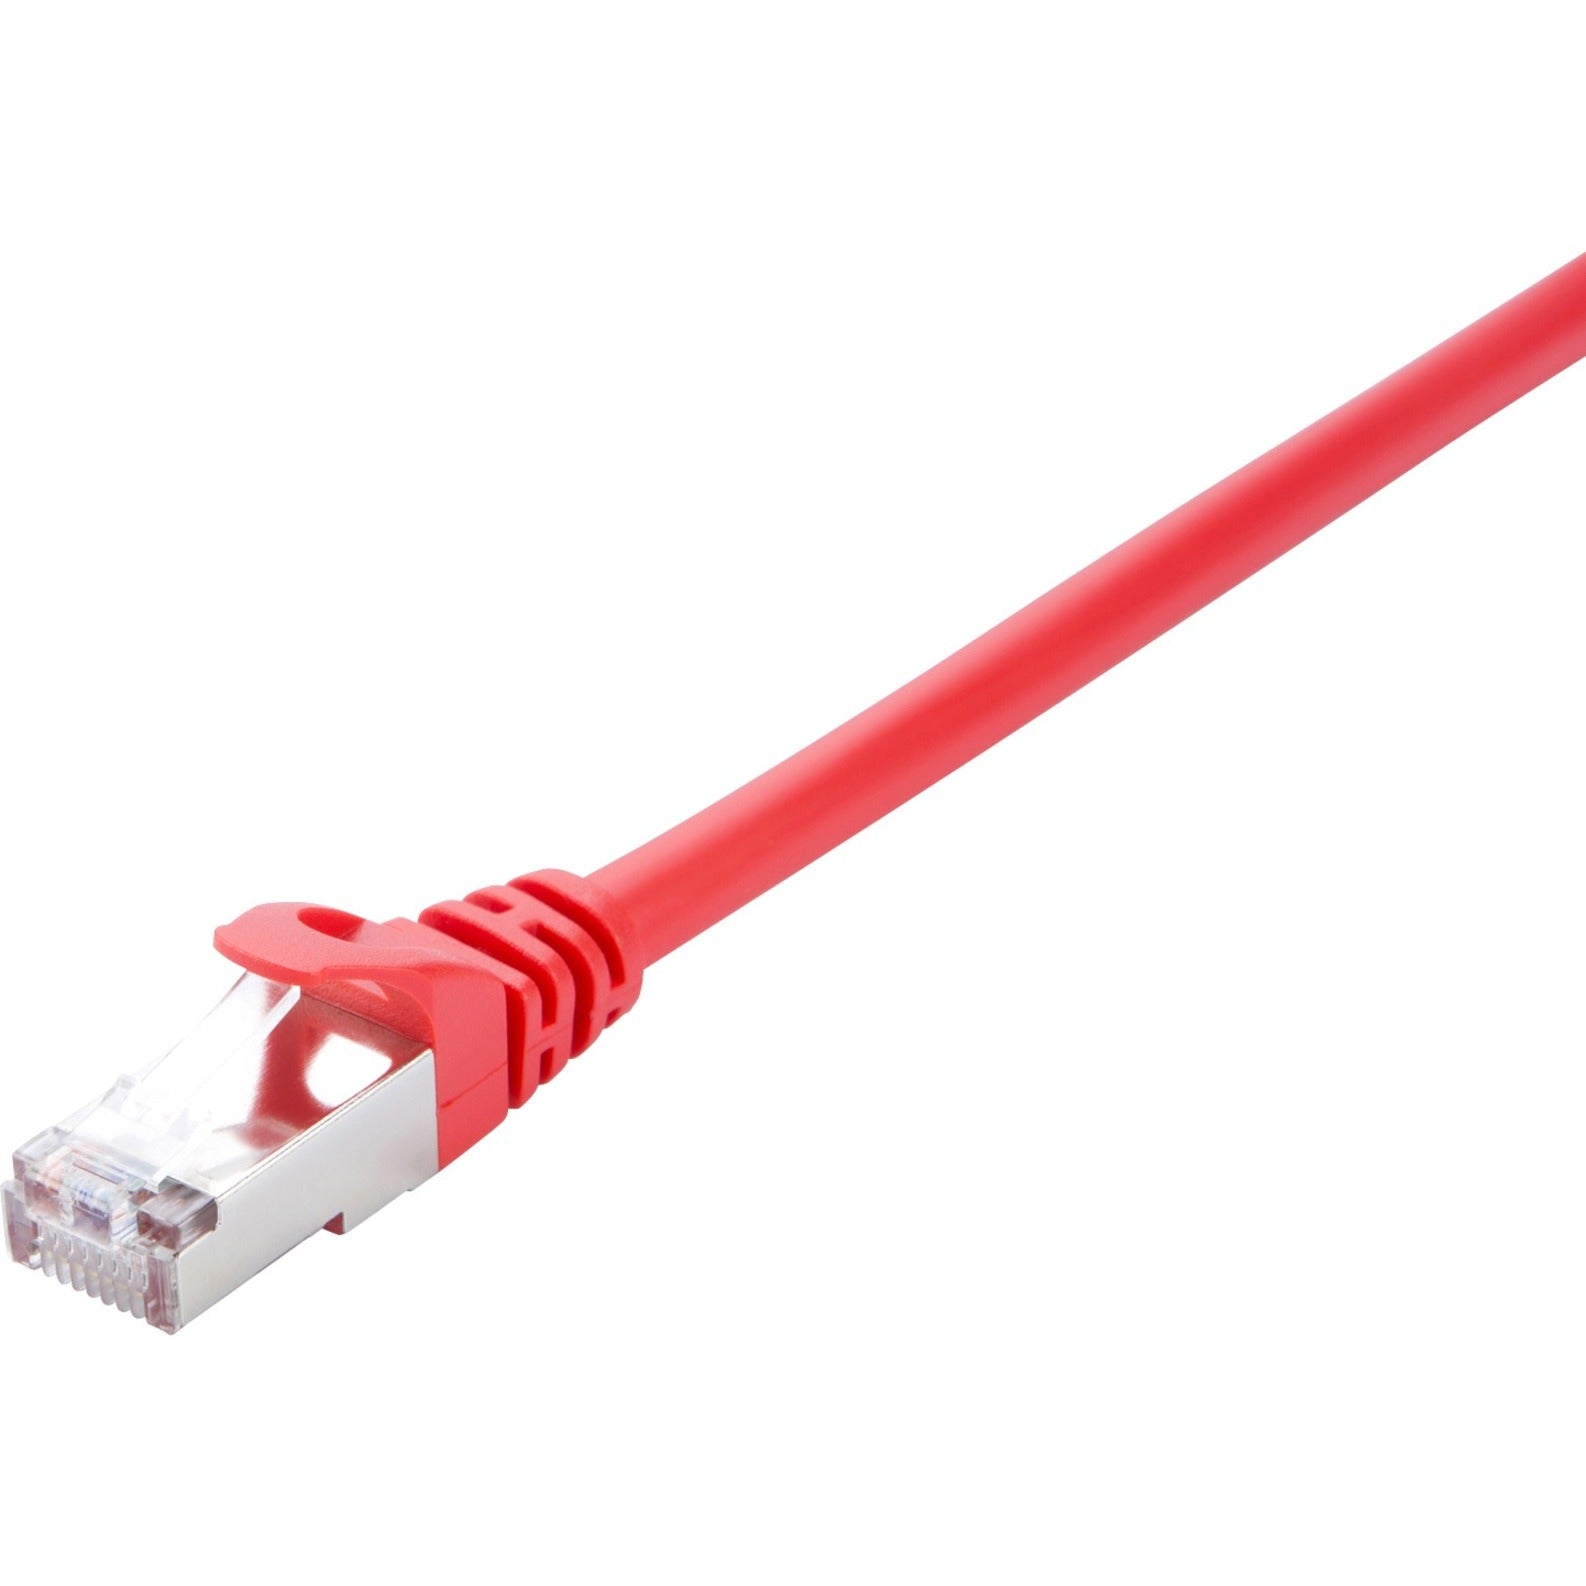 V7 V7CAT6STP-03M-RED-1N Red Cat6 Shielded (STP) Cable RJ45 Male to RJ45 Male 3m 10ft, Strain Relief, Locking Latch, Crosstalk Protection, Noise Reducing